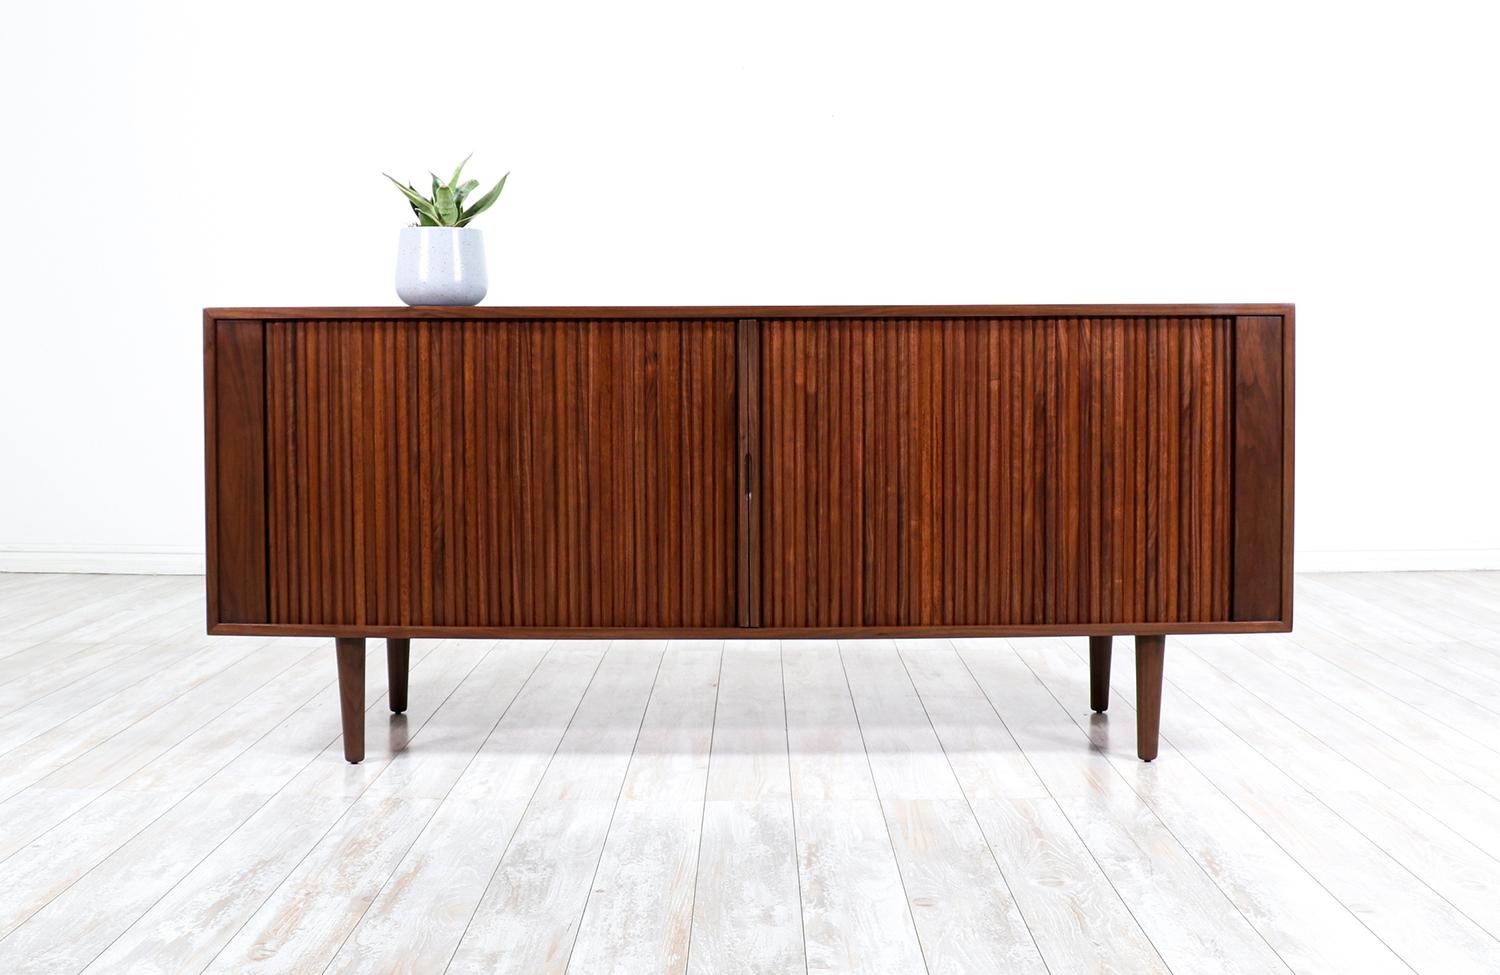 Introducing our first-ever modern credenza designed and crafted by Danish Modern L.A.'s artisans' house in Los Angeles, CA. Our skillfully crafted credenza showcases a solid American walnut case that features two tambour-doors with carved, recessed